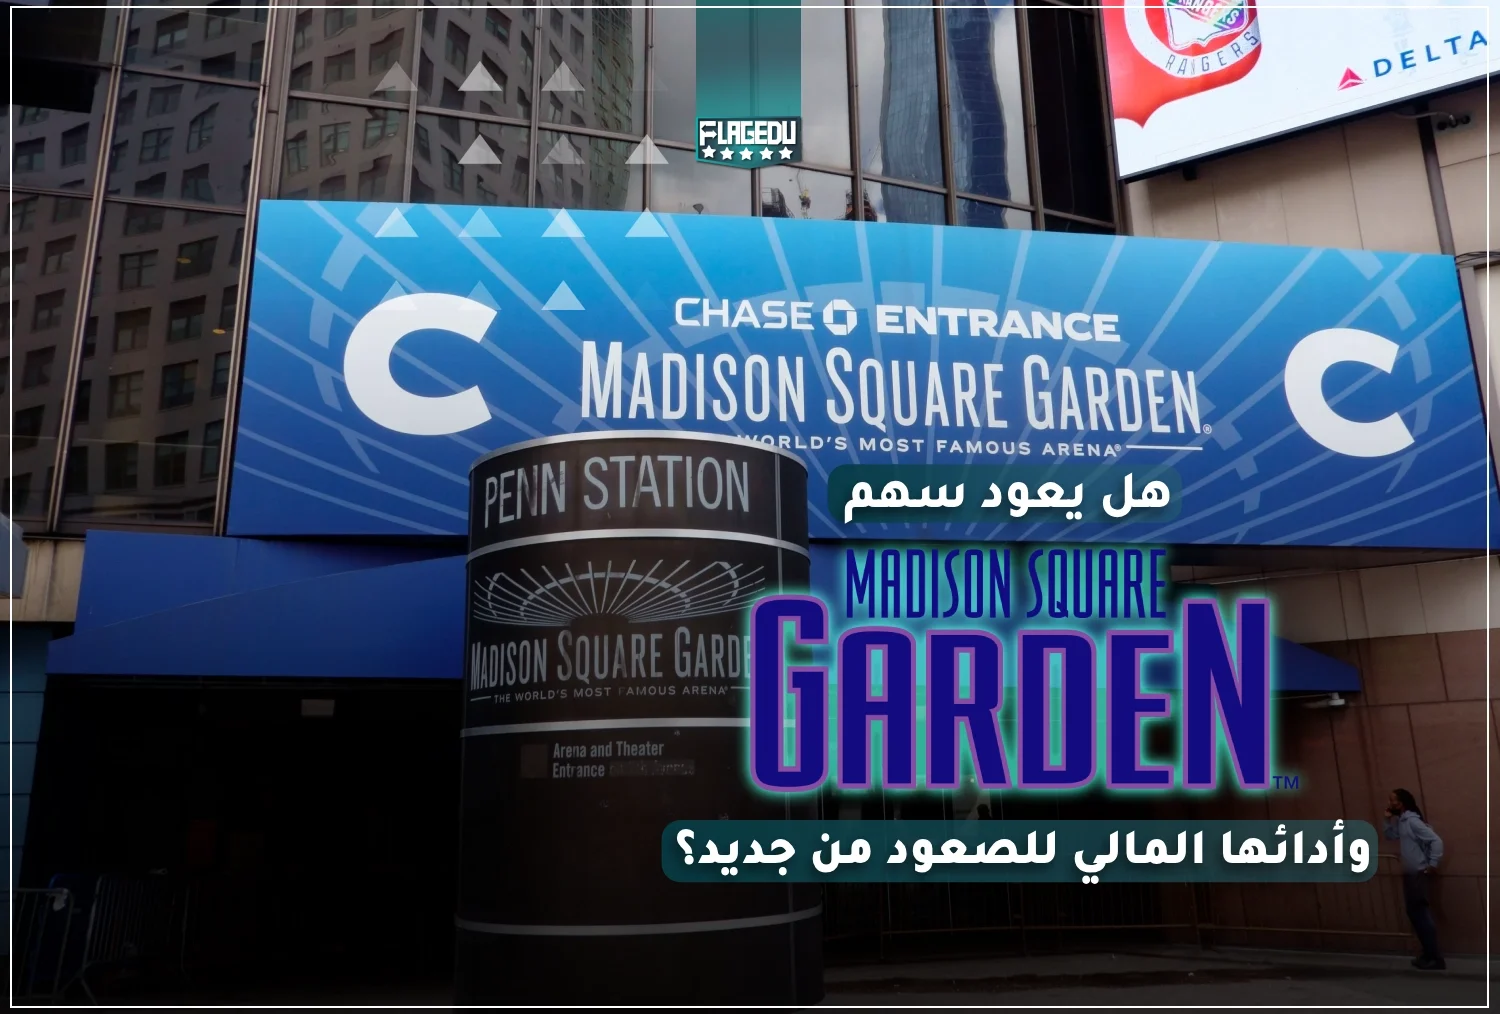 Madison Square Garden's stock and financial performance rise